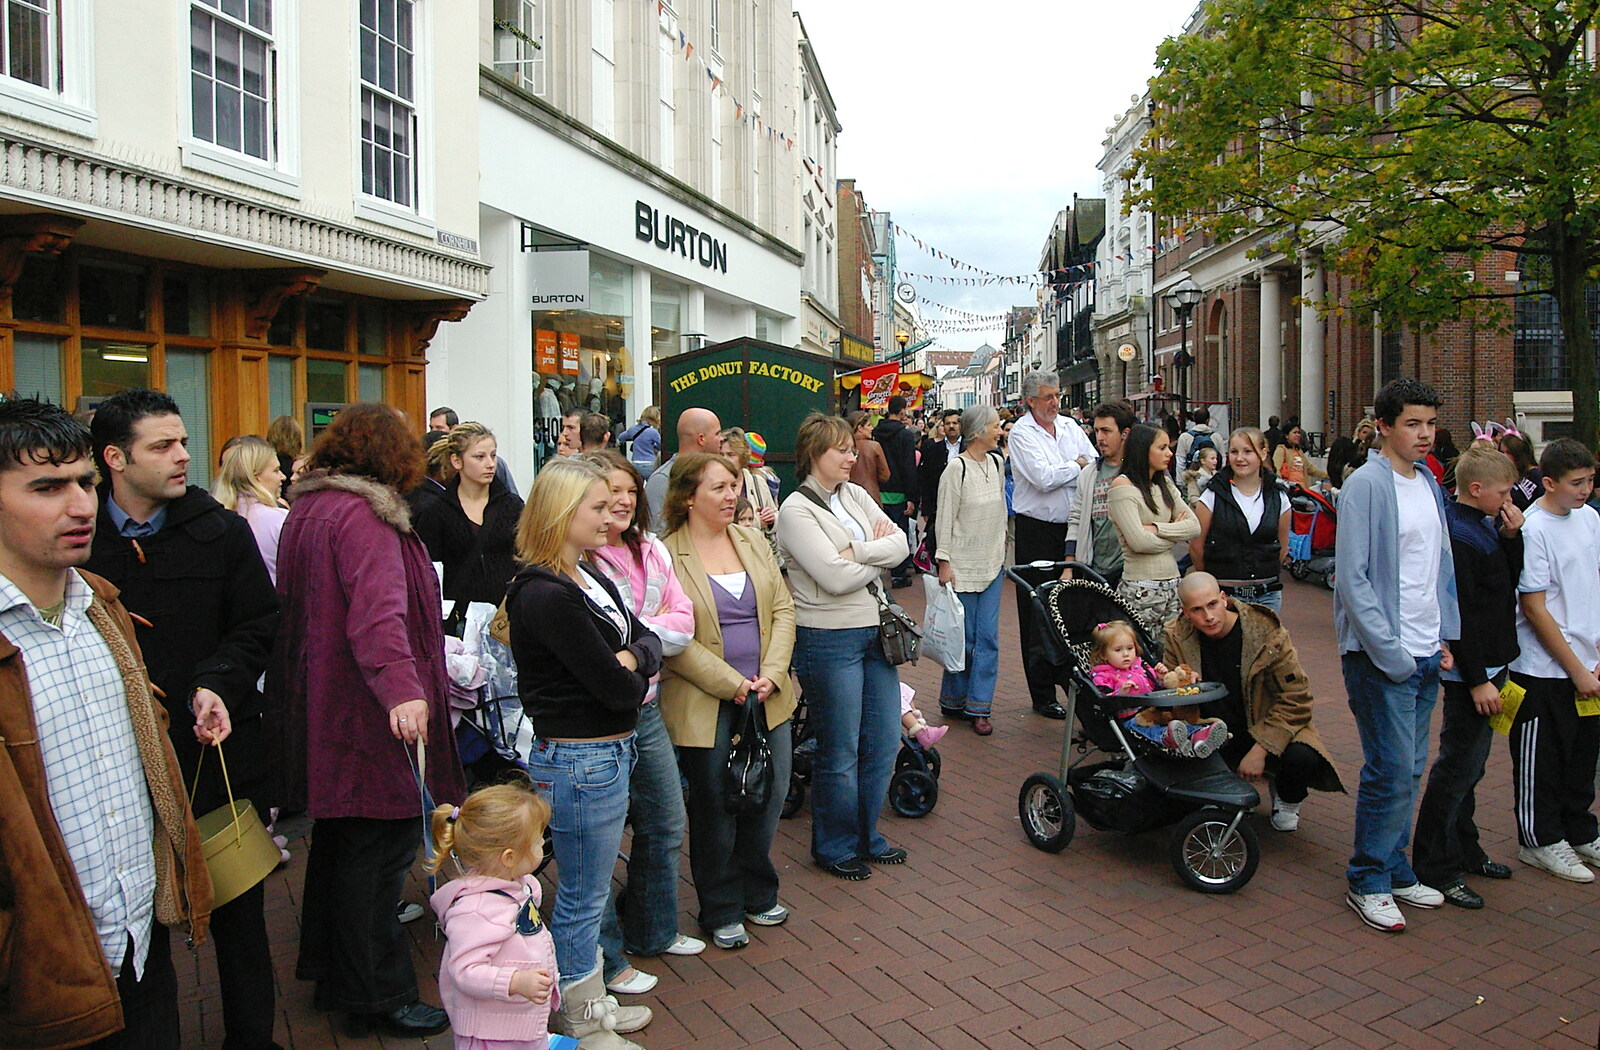 Crowds outside Burton in Ipswich from Suffolk County Council Dereliction, and Cotton Flamenco, Suffolk - 22nd October 2005